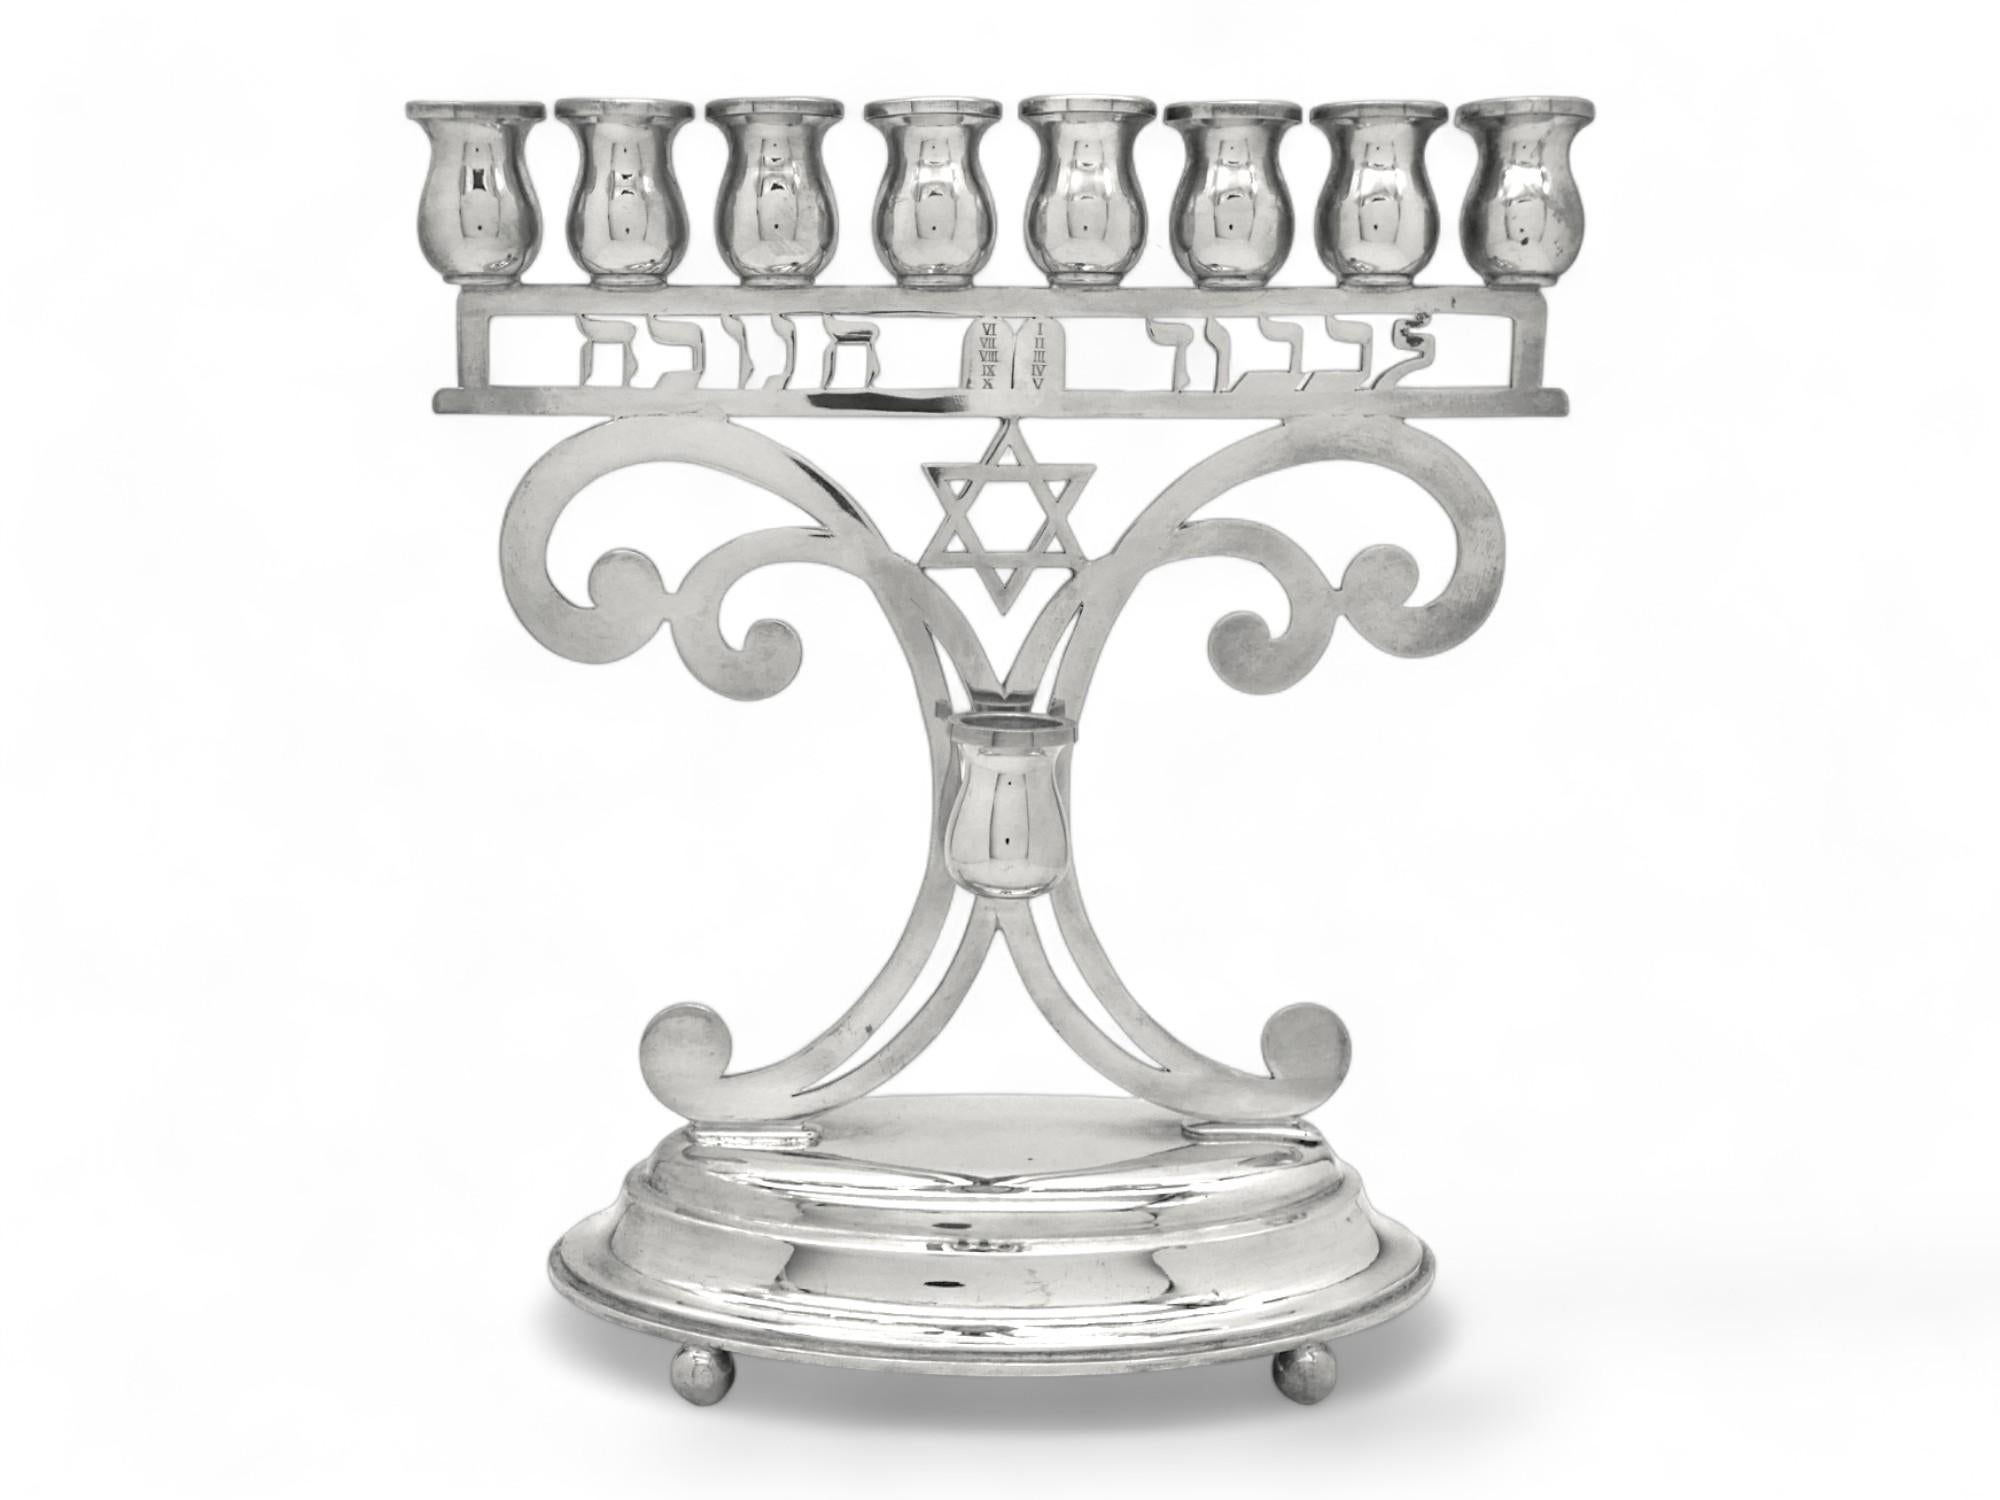 Modern and stylish Hanukkah lamp made at the beginning of the modern period of the 20th century in Austria.

Hannukah lamp is mounted on a well-rounded oval stepped base which is supported by four ball feet.

Main body is pierced with four large